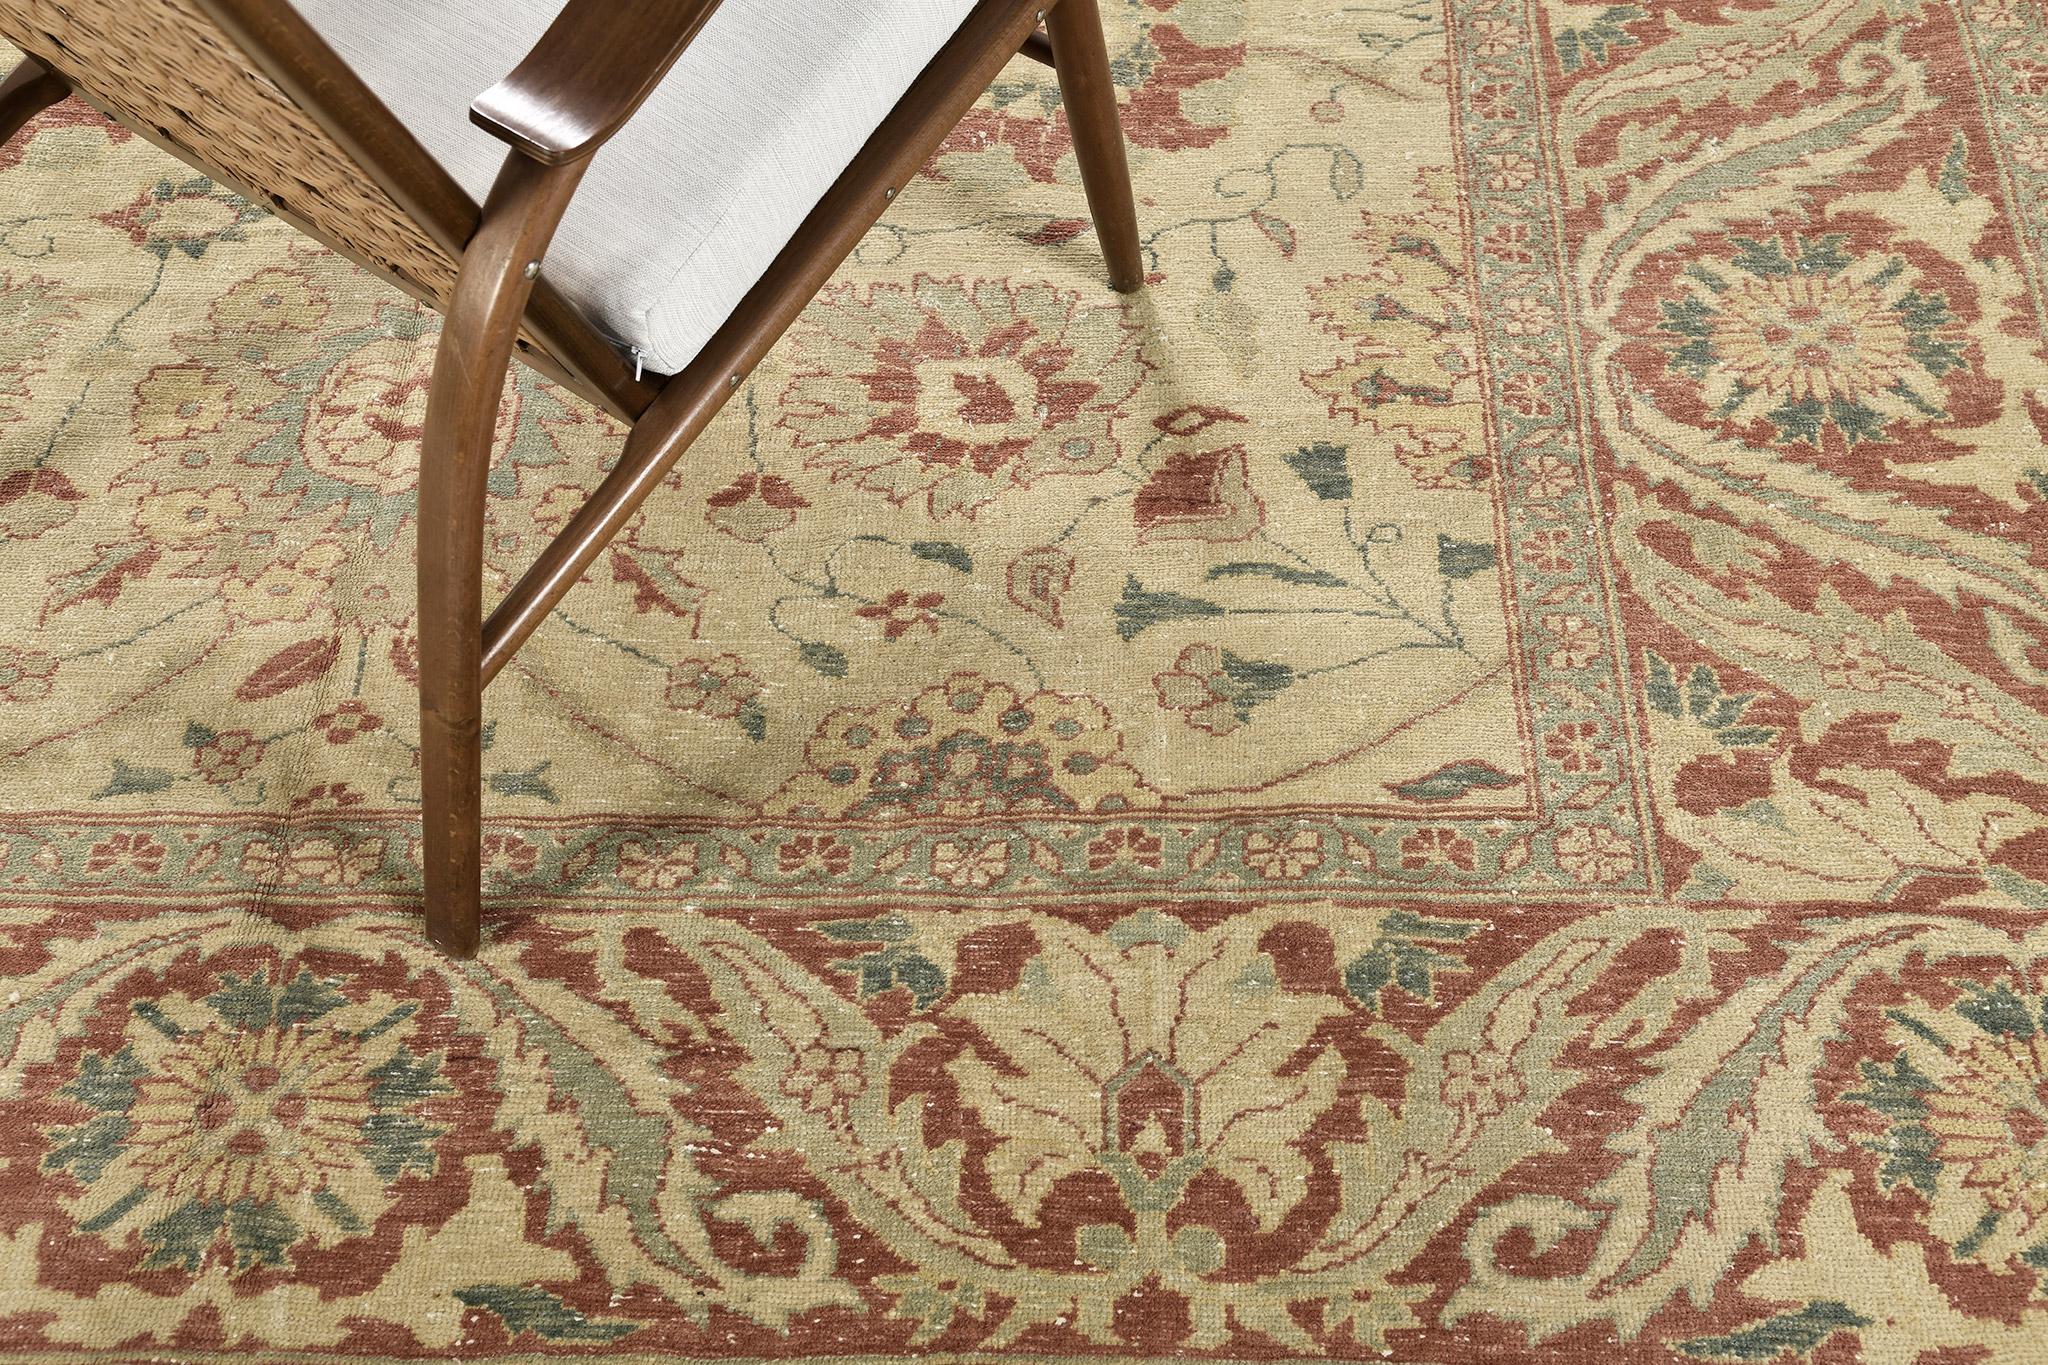 A gorgeous revival of the Egyptian Sultanabad square rug was made from hand-spun wool and woven meticulously. All the prettiest foliage and sophisticated florid borders are matched and will captivate your guest's heart. Traditional themes will be a